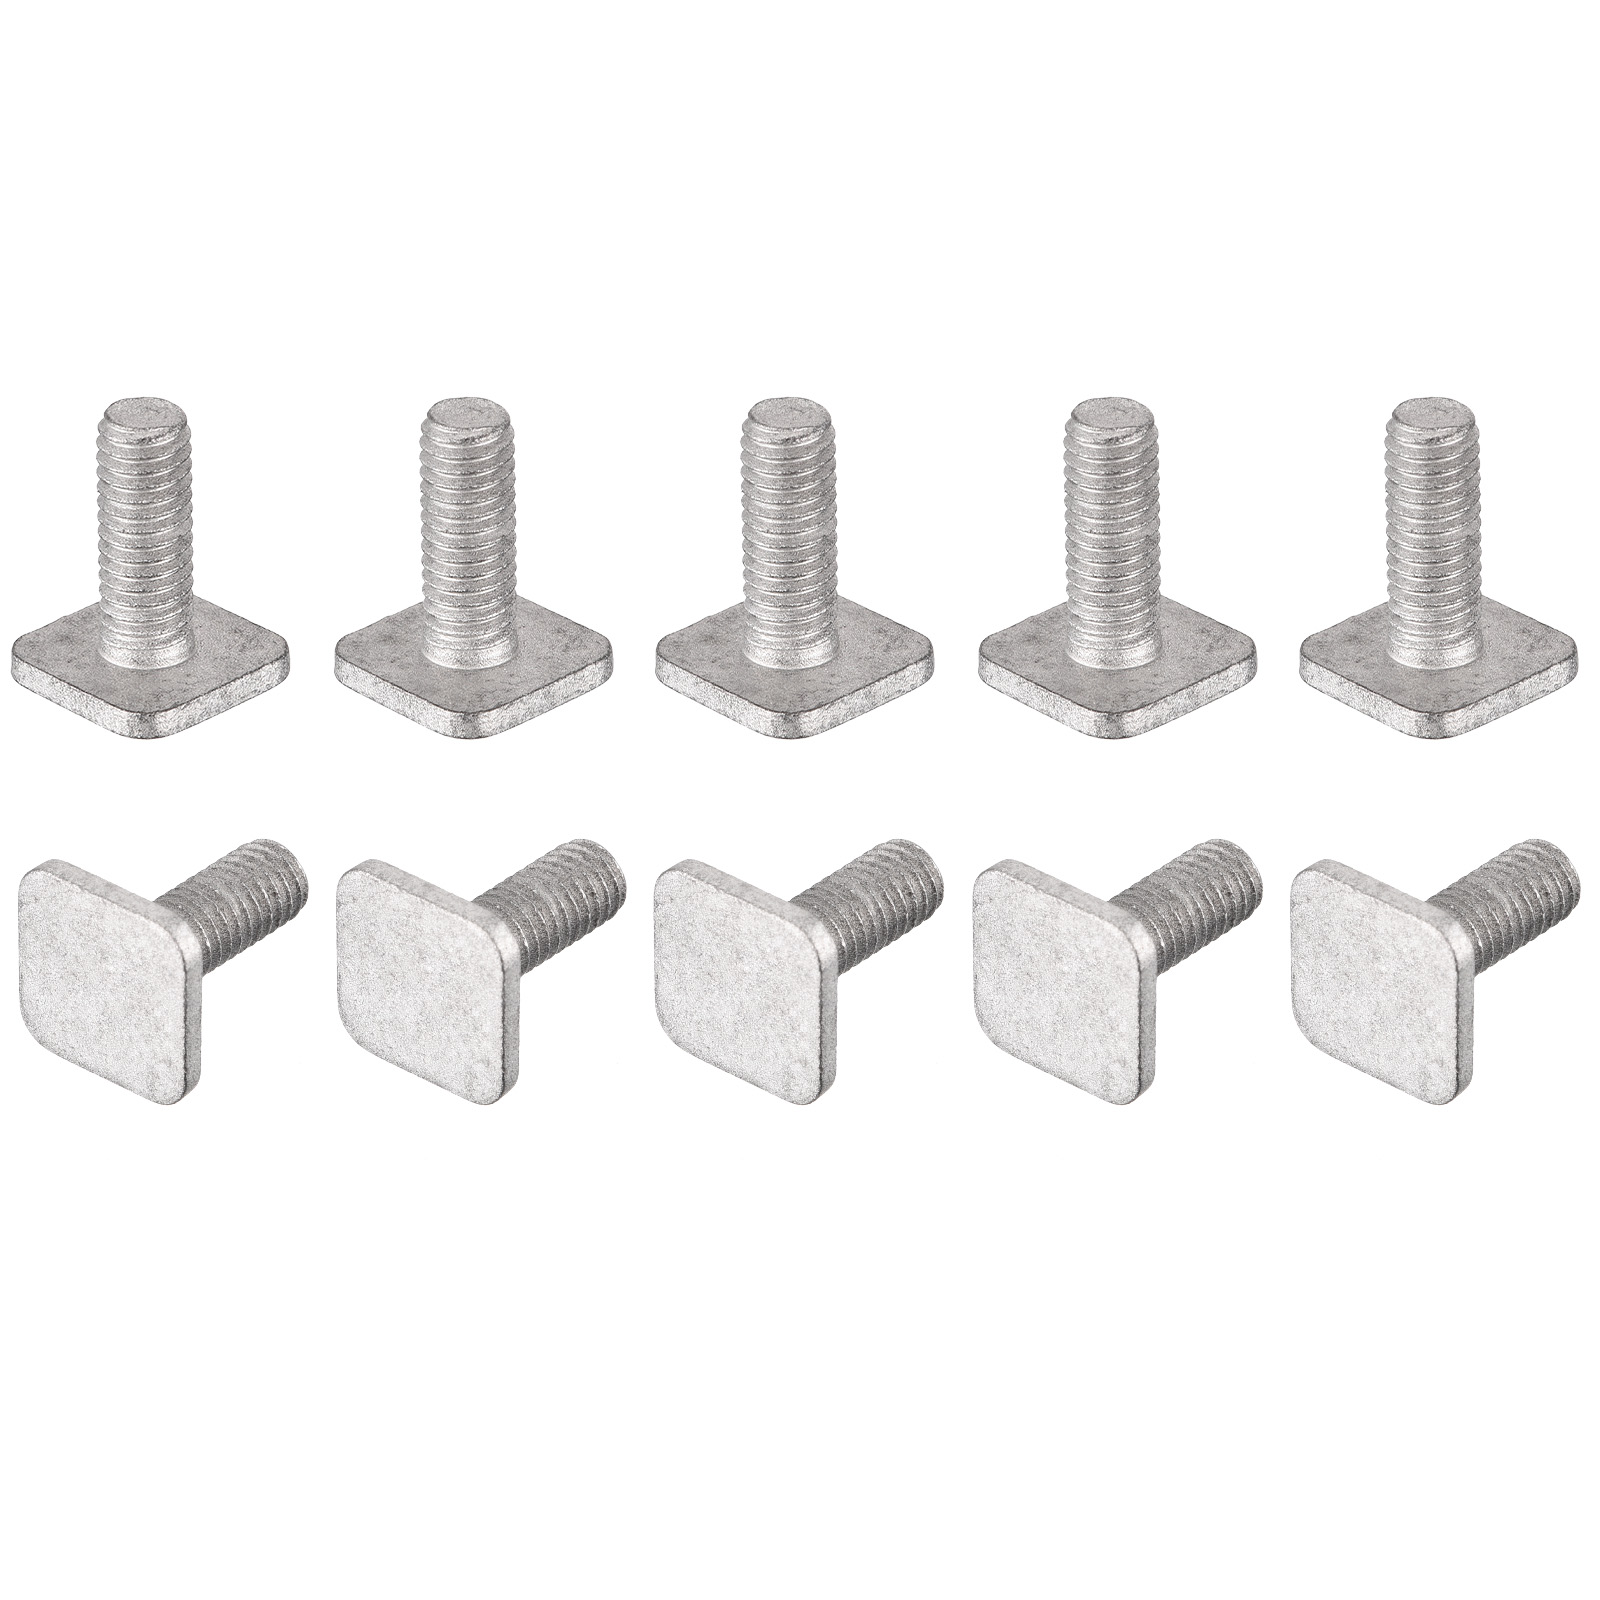 Square Head Bolt, 20 Pack M6x16mm Carbon Steel Grade 8.8 Square Screws, Gray - image 1 of 5